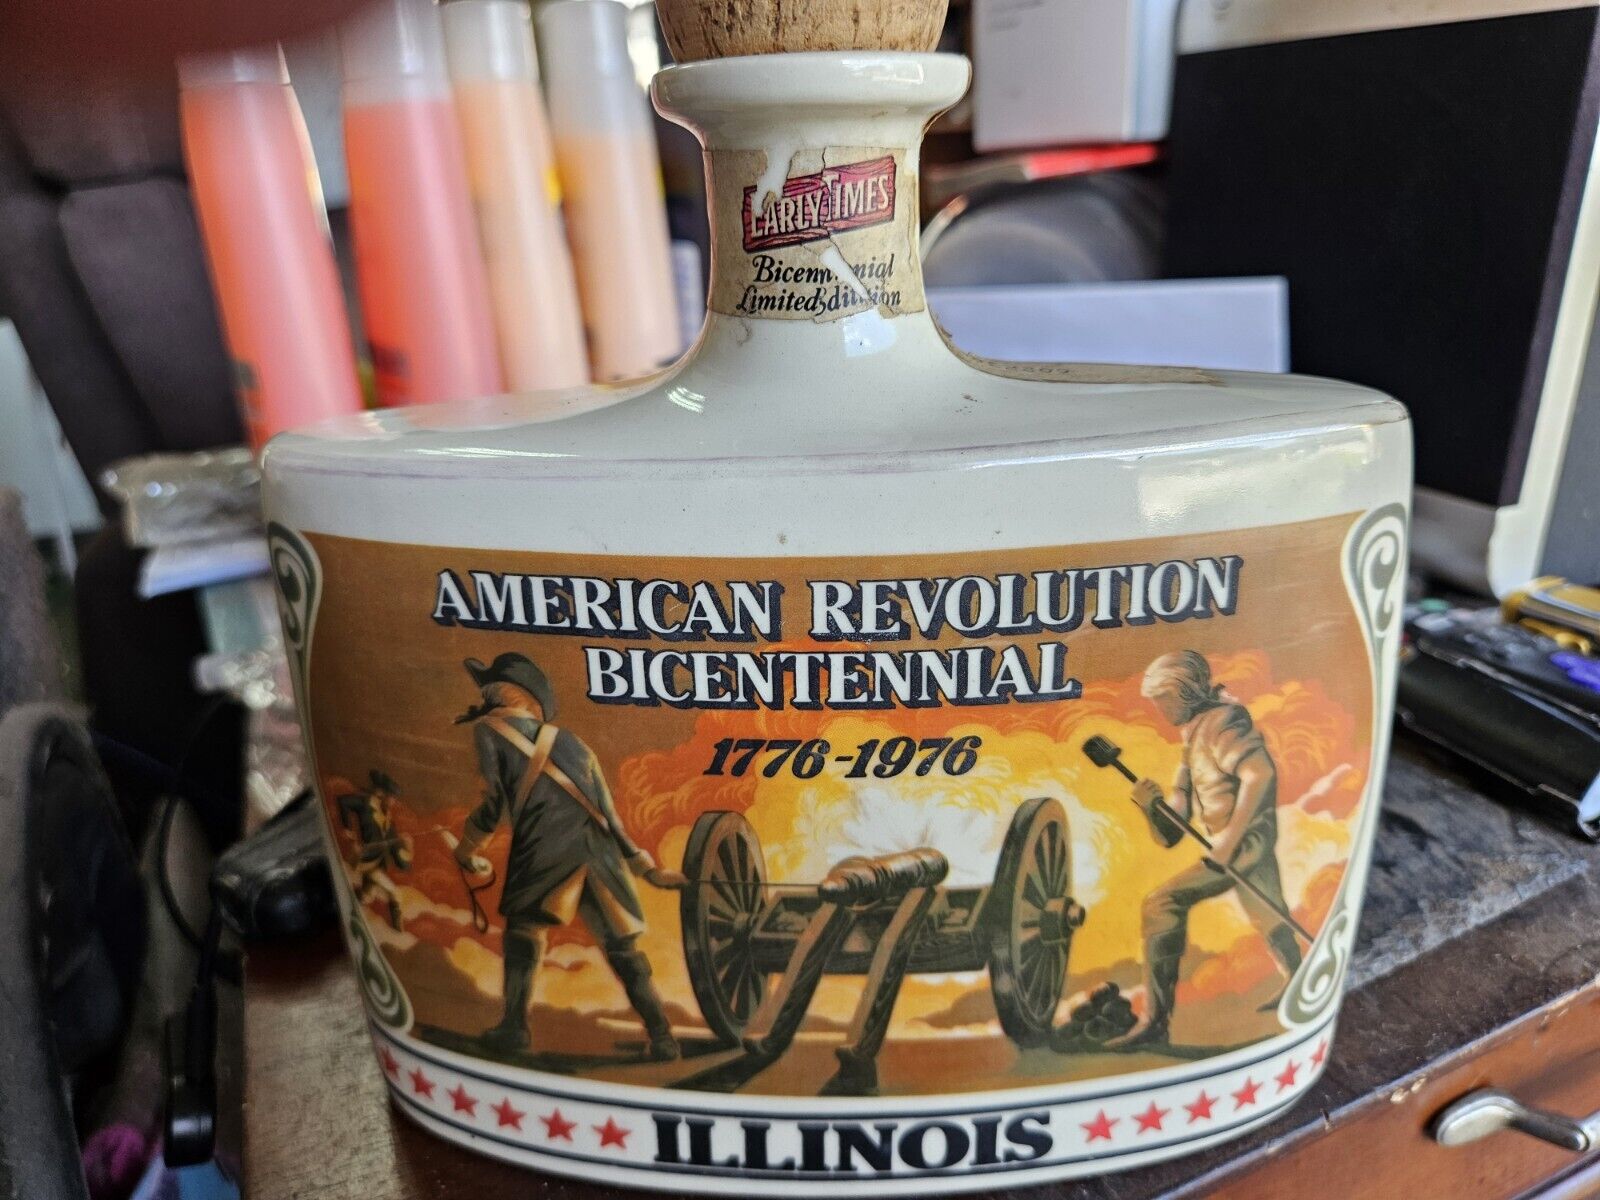 Early Times American Revolution Bicentennial 1776-1976 Illinois Decanter